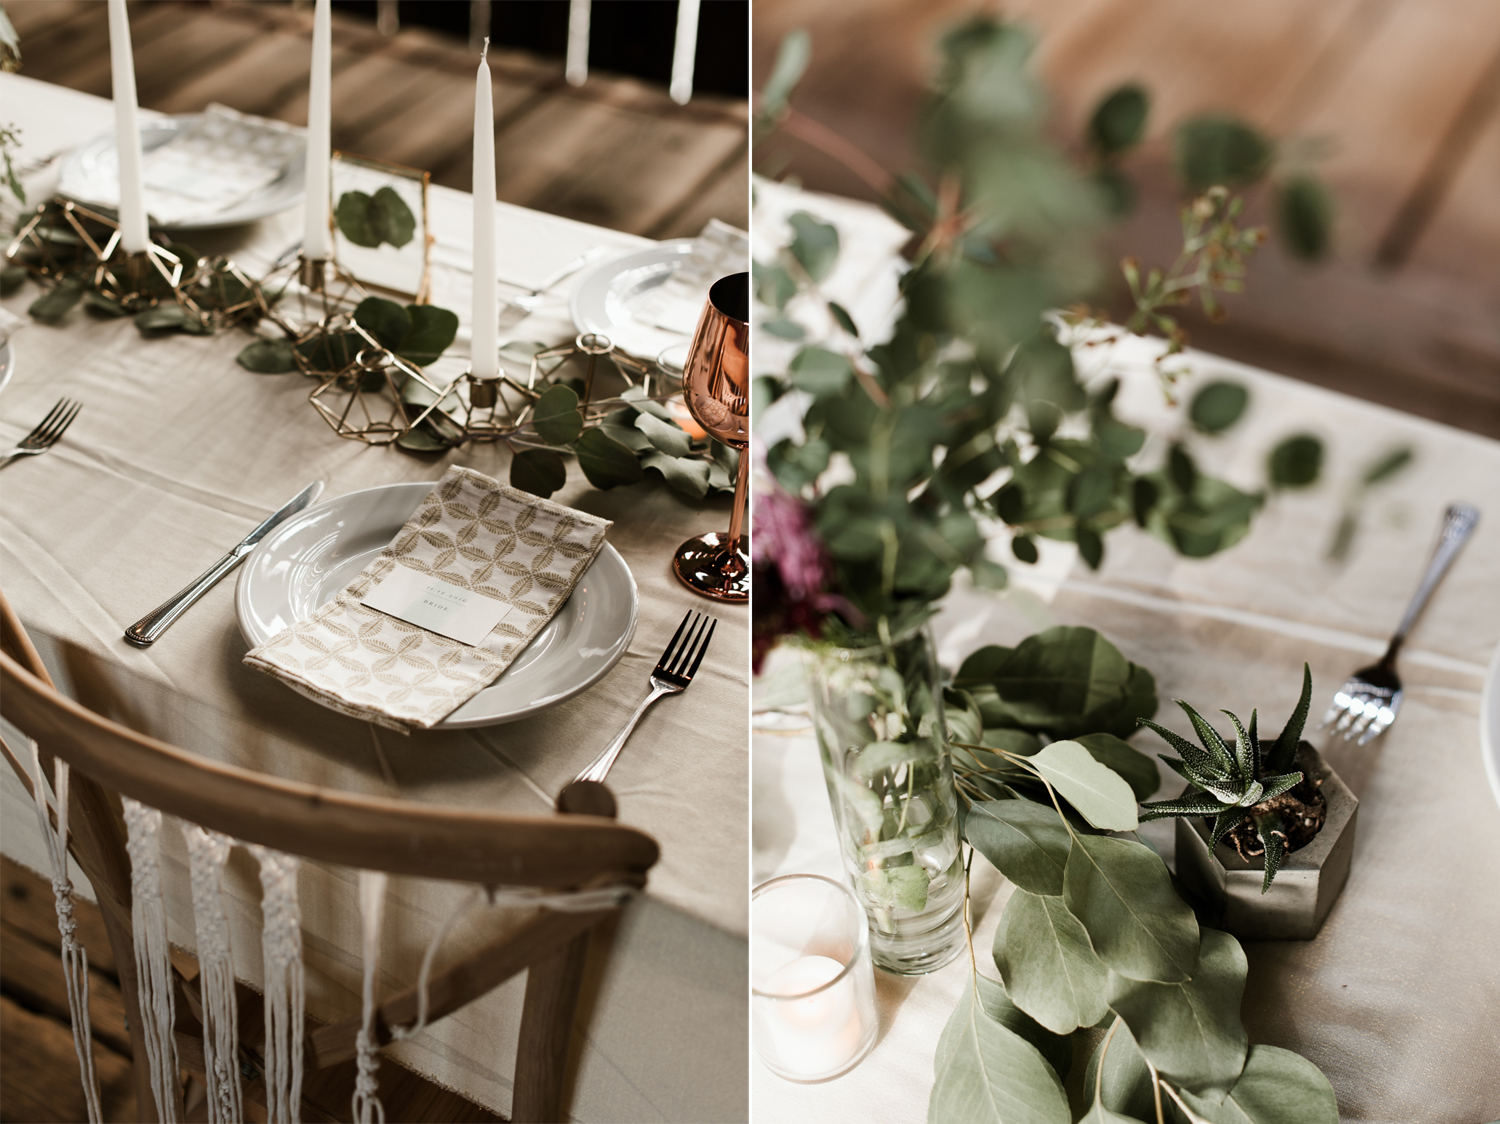 Details of the dining table at a bohemian wedding. By West Coast wedding photographer Briana Morrison